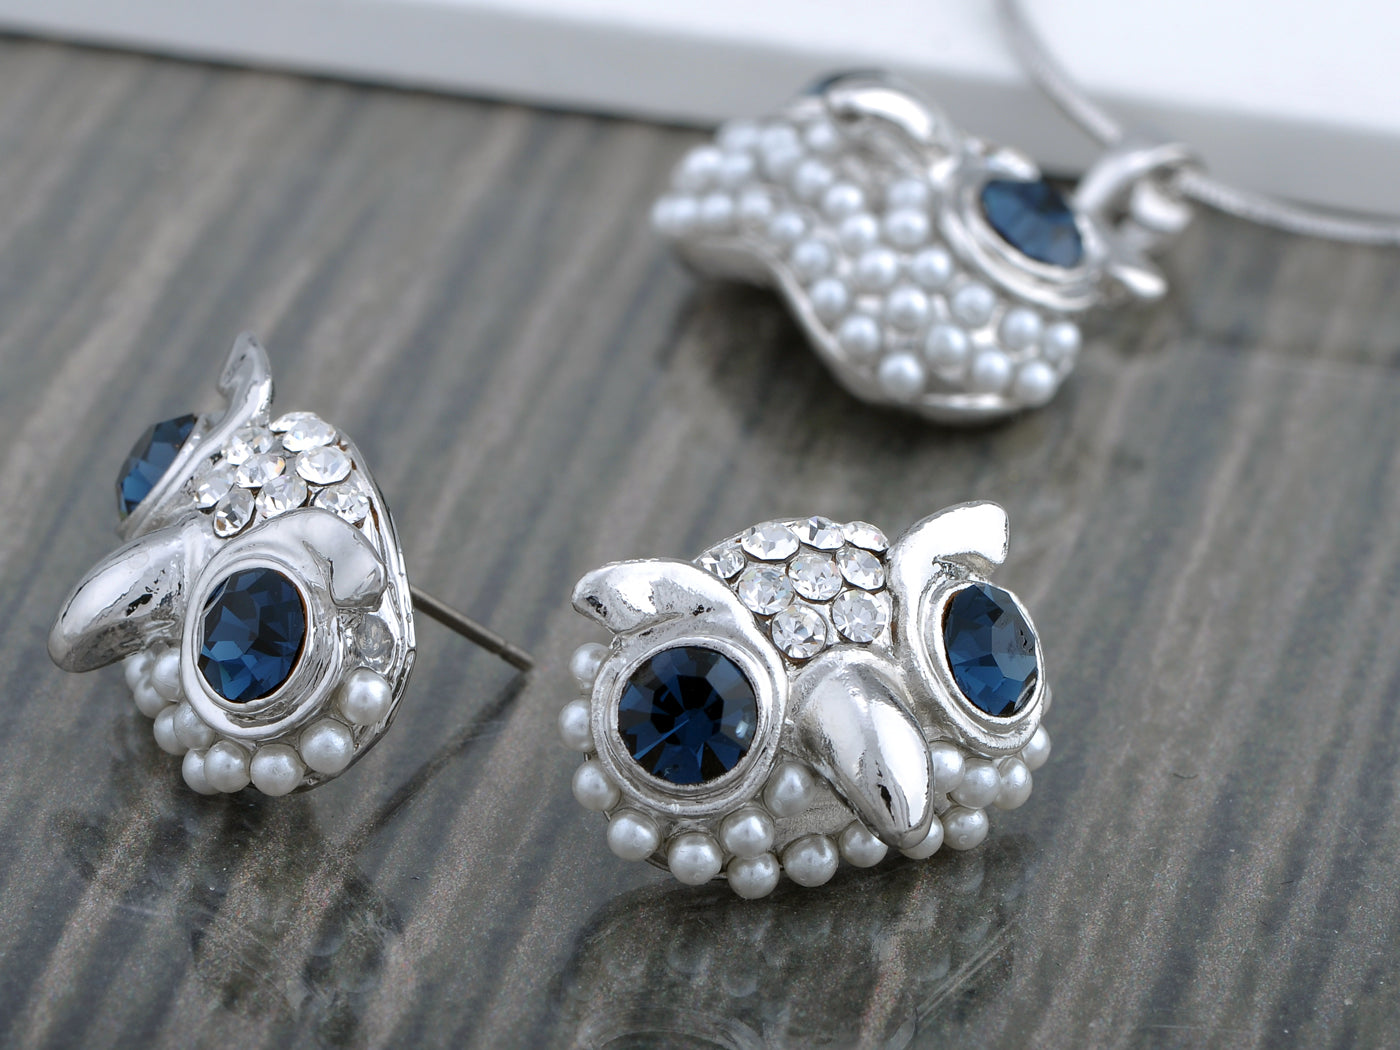 Swarovski Crystal Pearl Blue Eyed Curious Owl Element Earring Necklace Set